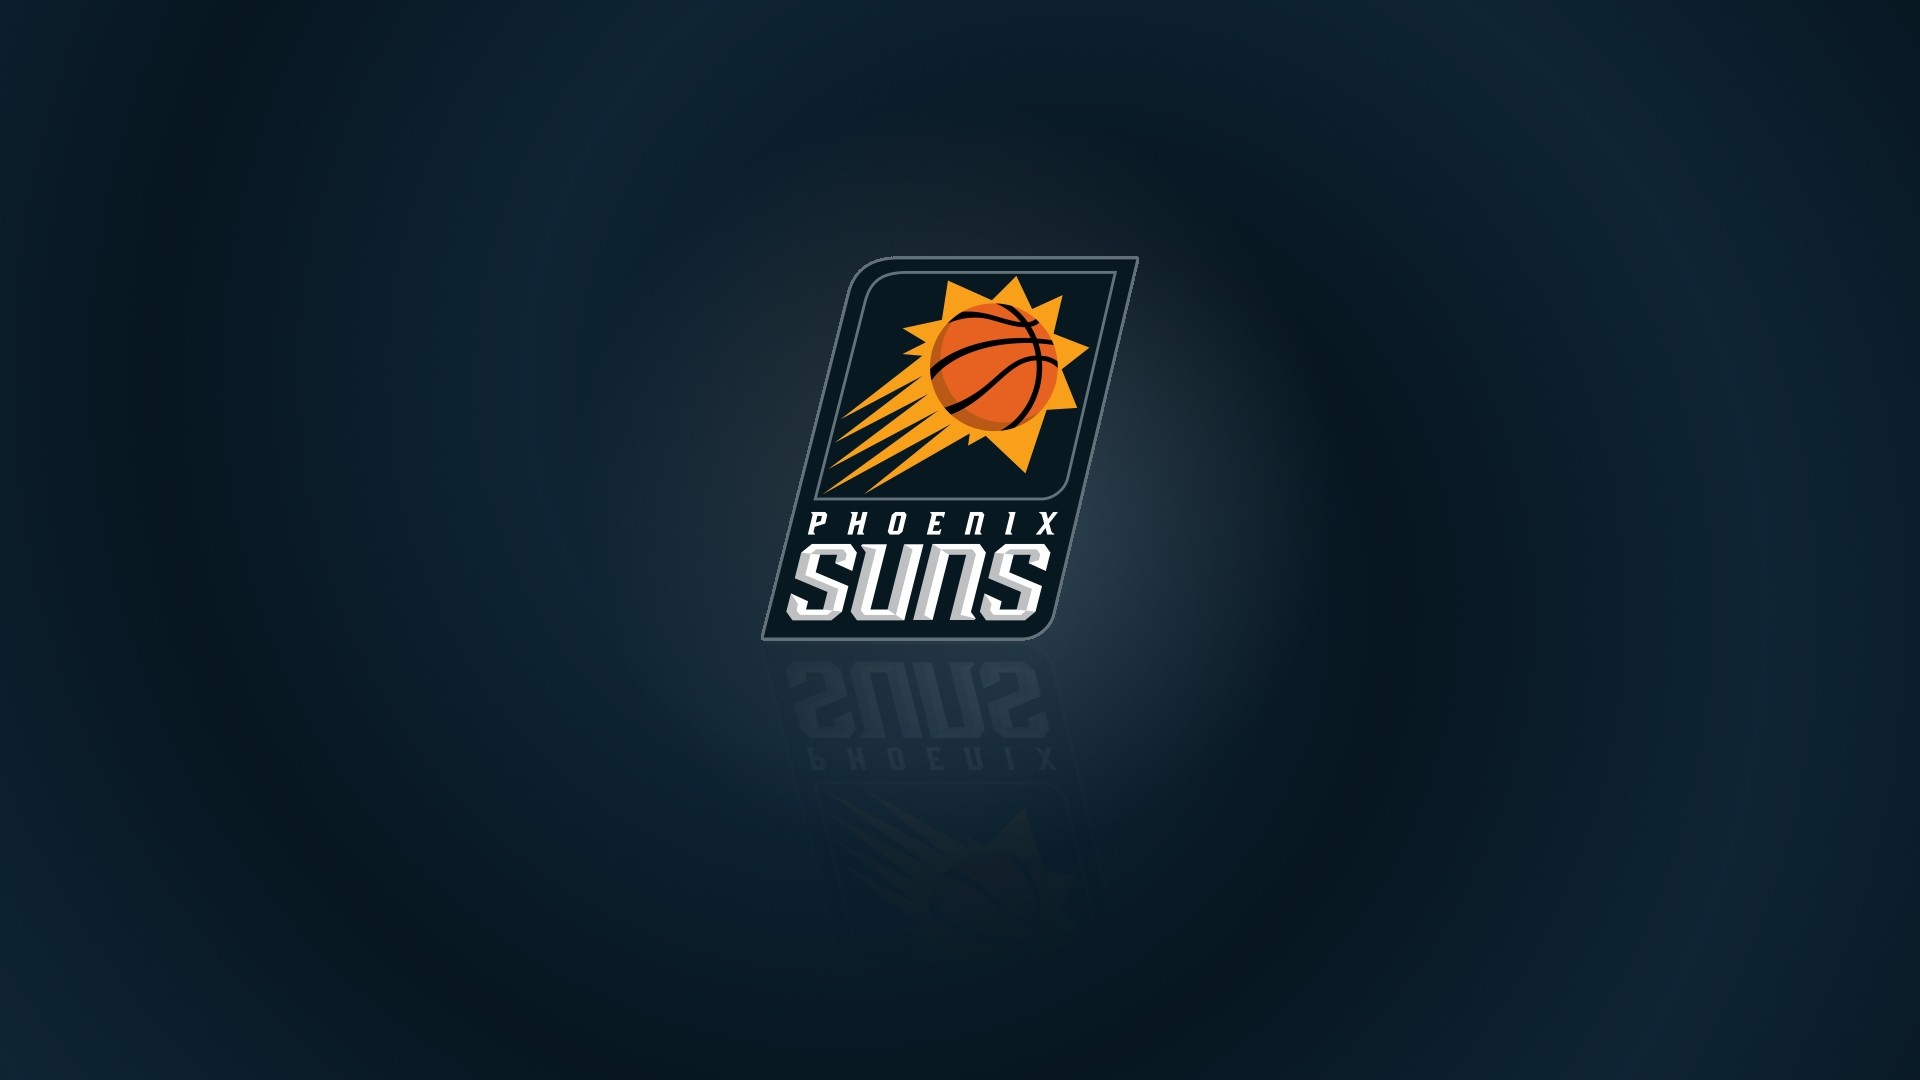 Wallpapers HD Phoenix Suns Logo with high-resolution 1920x1080 pixel. You can use this wallpaper for your Desktop Computer Backgrounds, Windows or Mac Screensavers, iPhone Lock screen, Tablet or Android and another Mobile Phone device